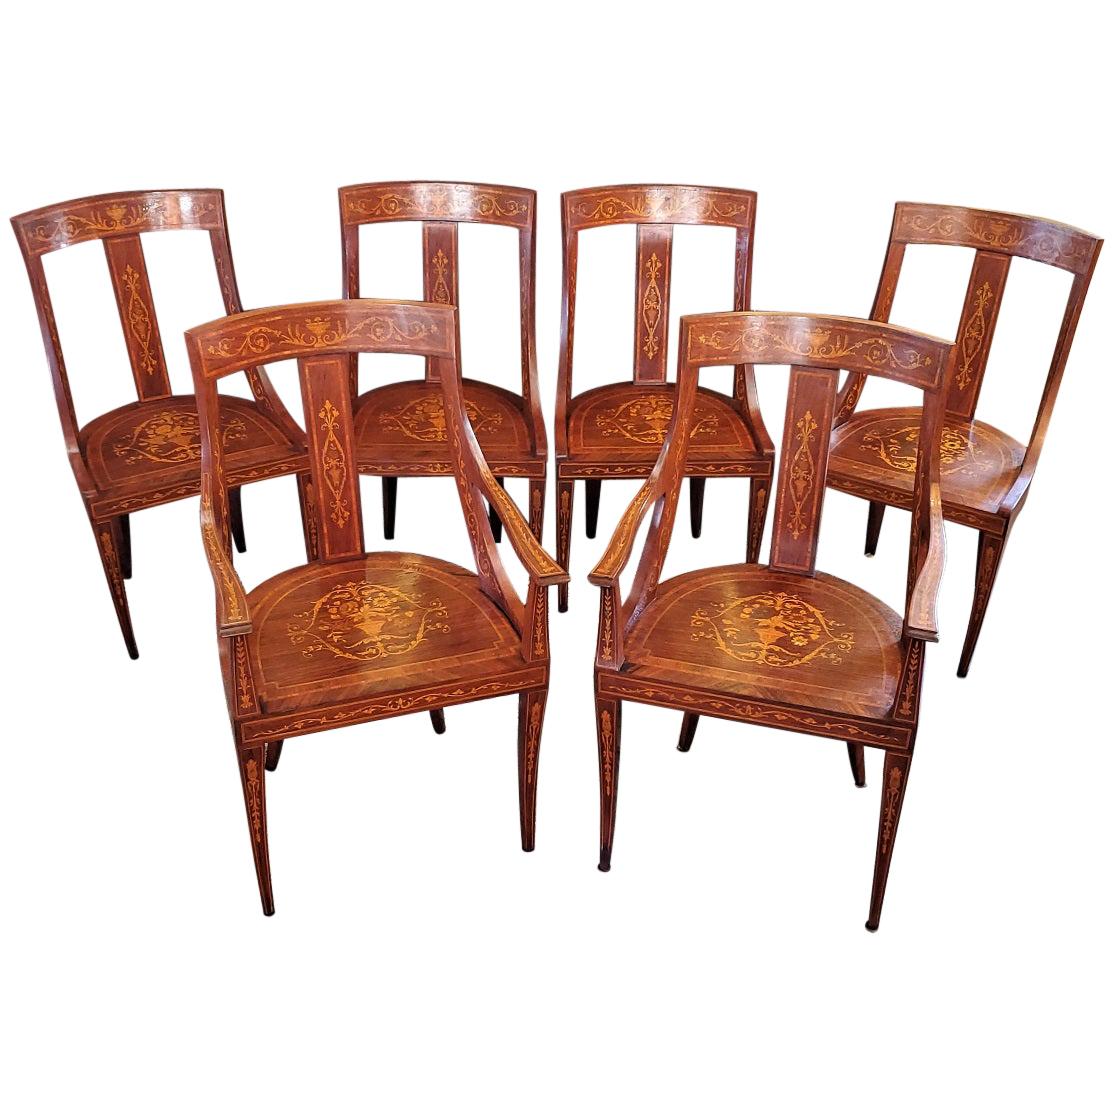 Set of 6 French Empire Marquetry Chairs